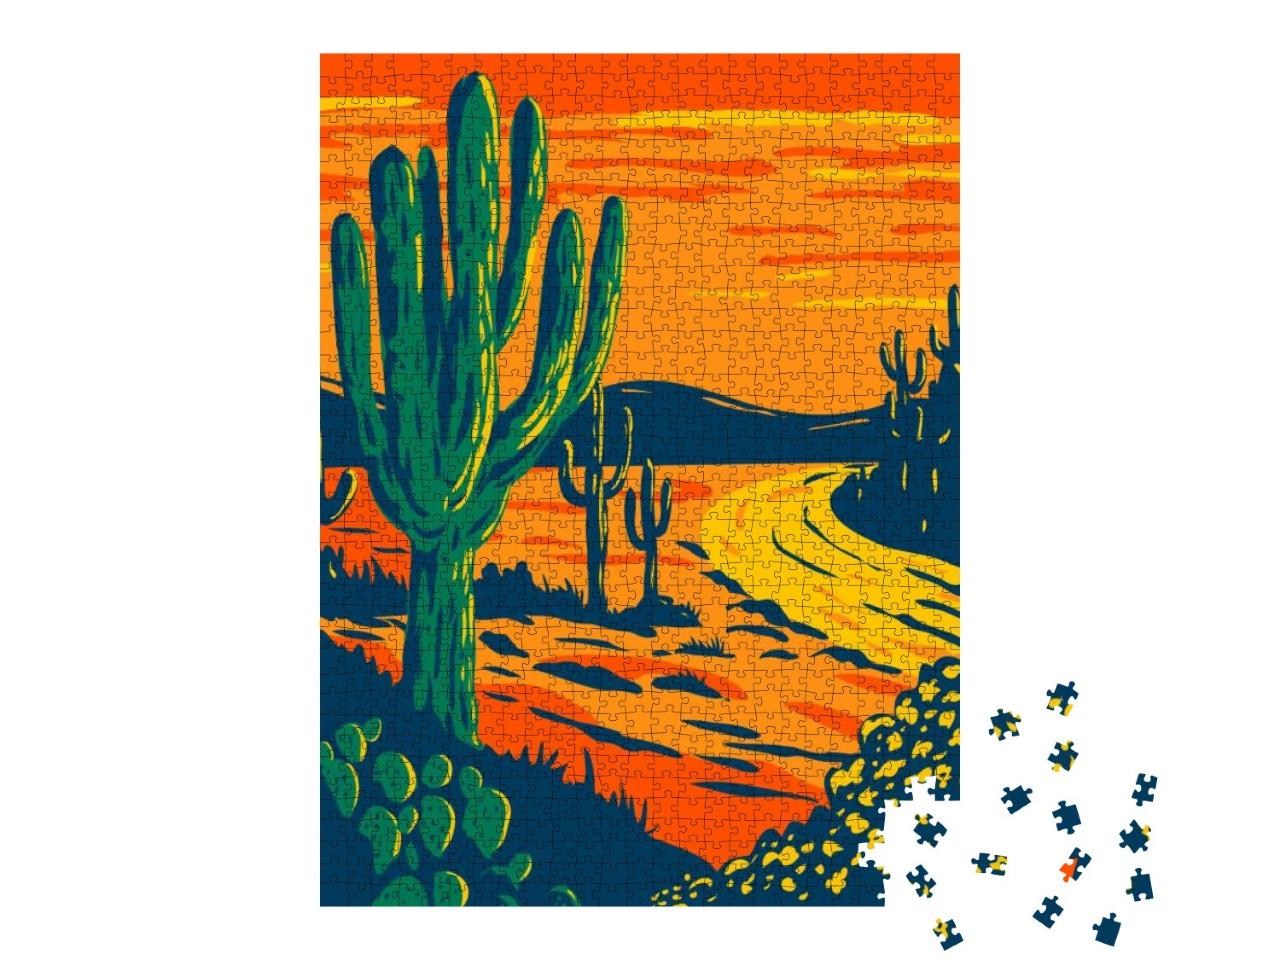 Saguaro Cactus At Dusk in Saguaro National Park in Tucson... Jigsaw Puzzle with 1000 pieces